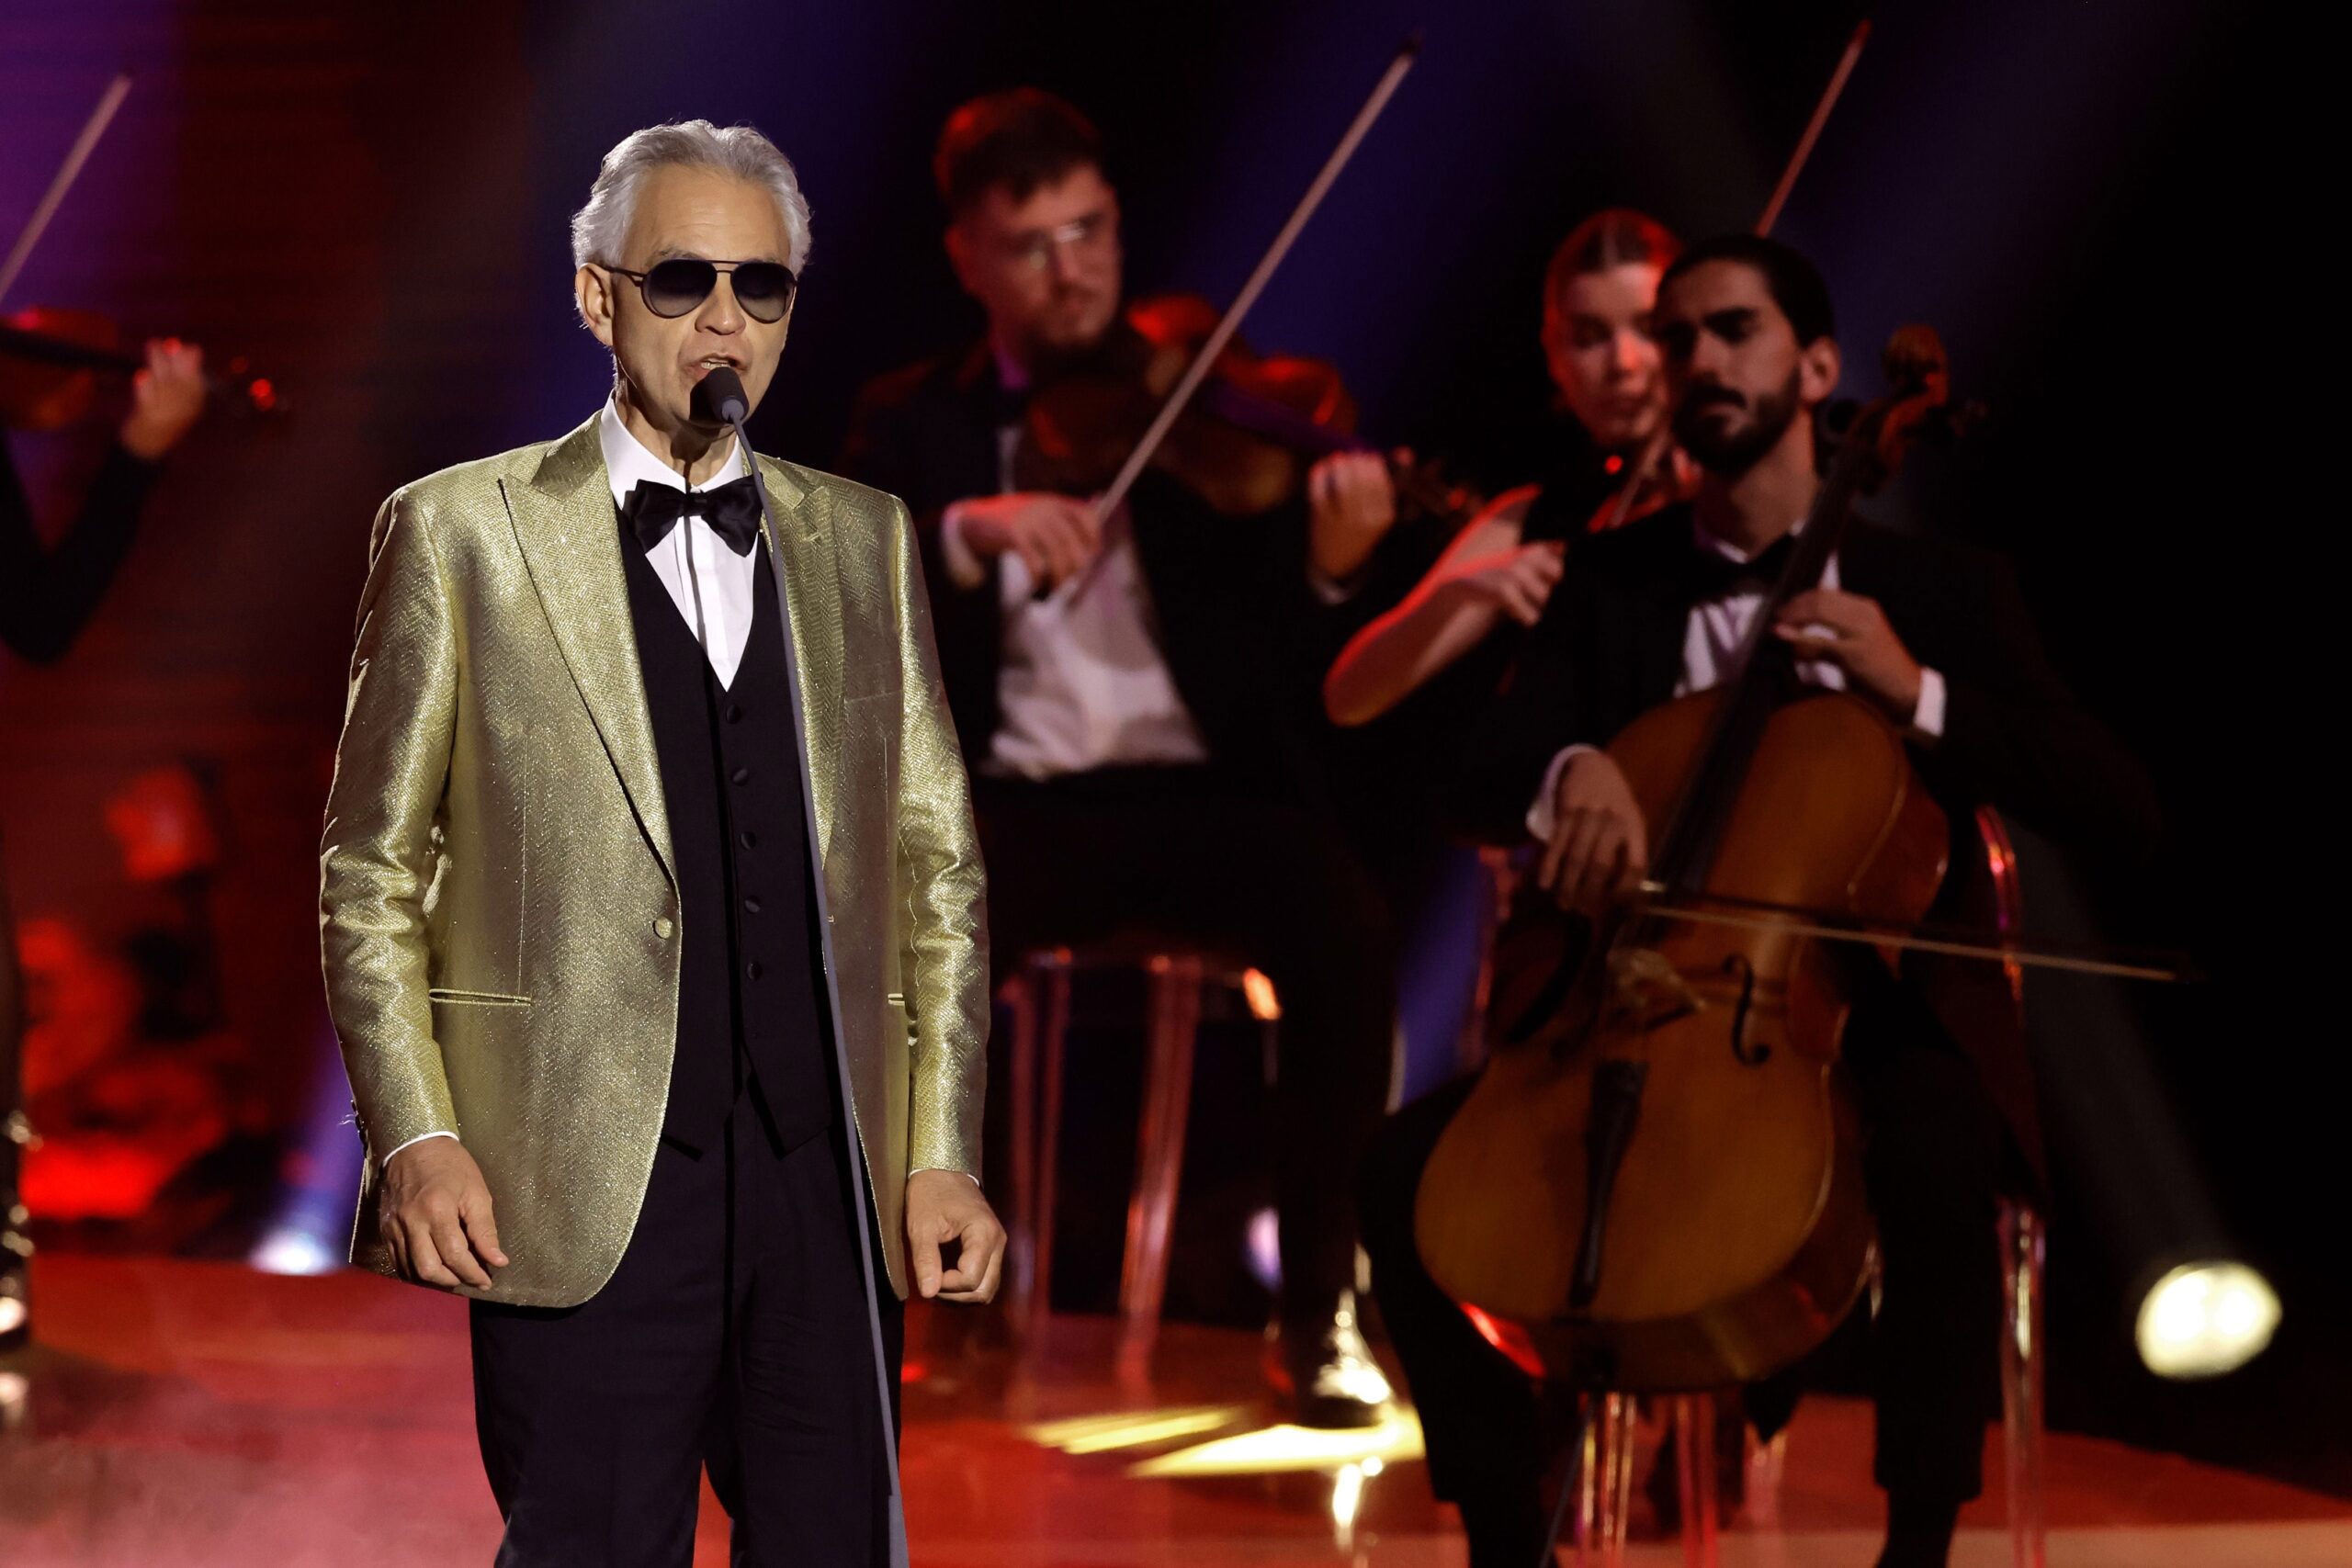 Andrea Bocelli reschedules dates, releases statement about canceled shows